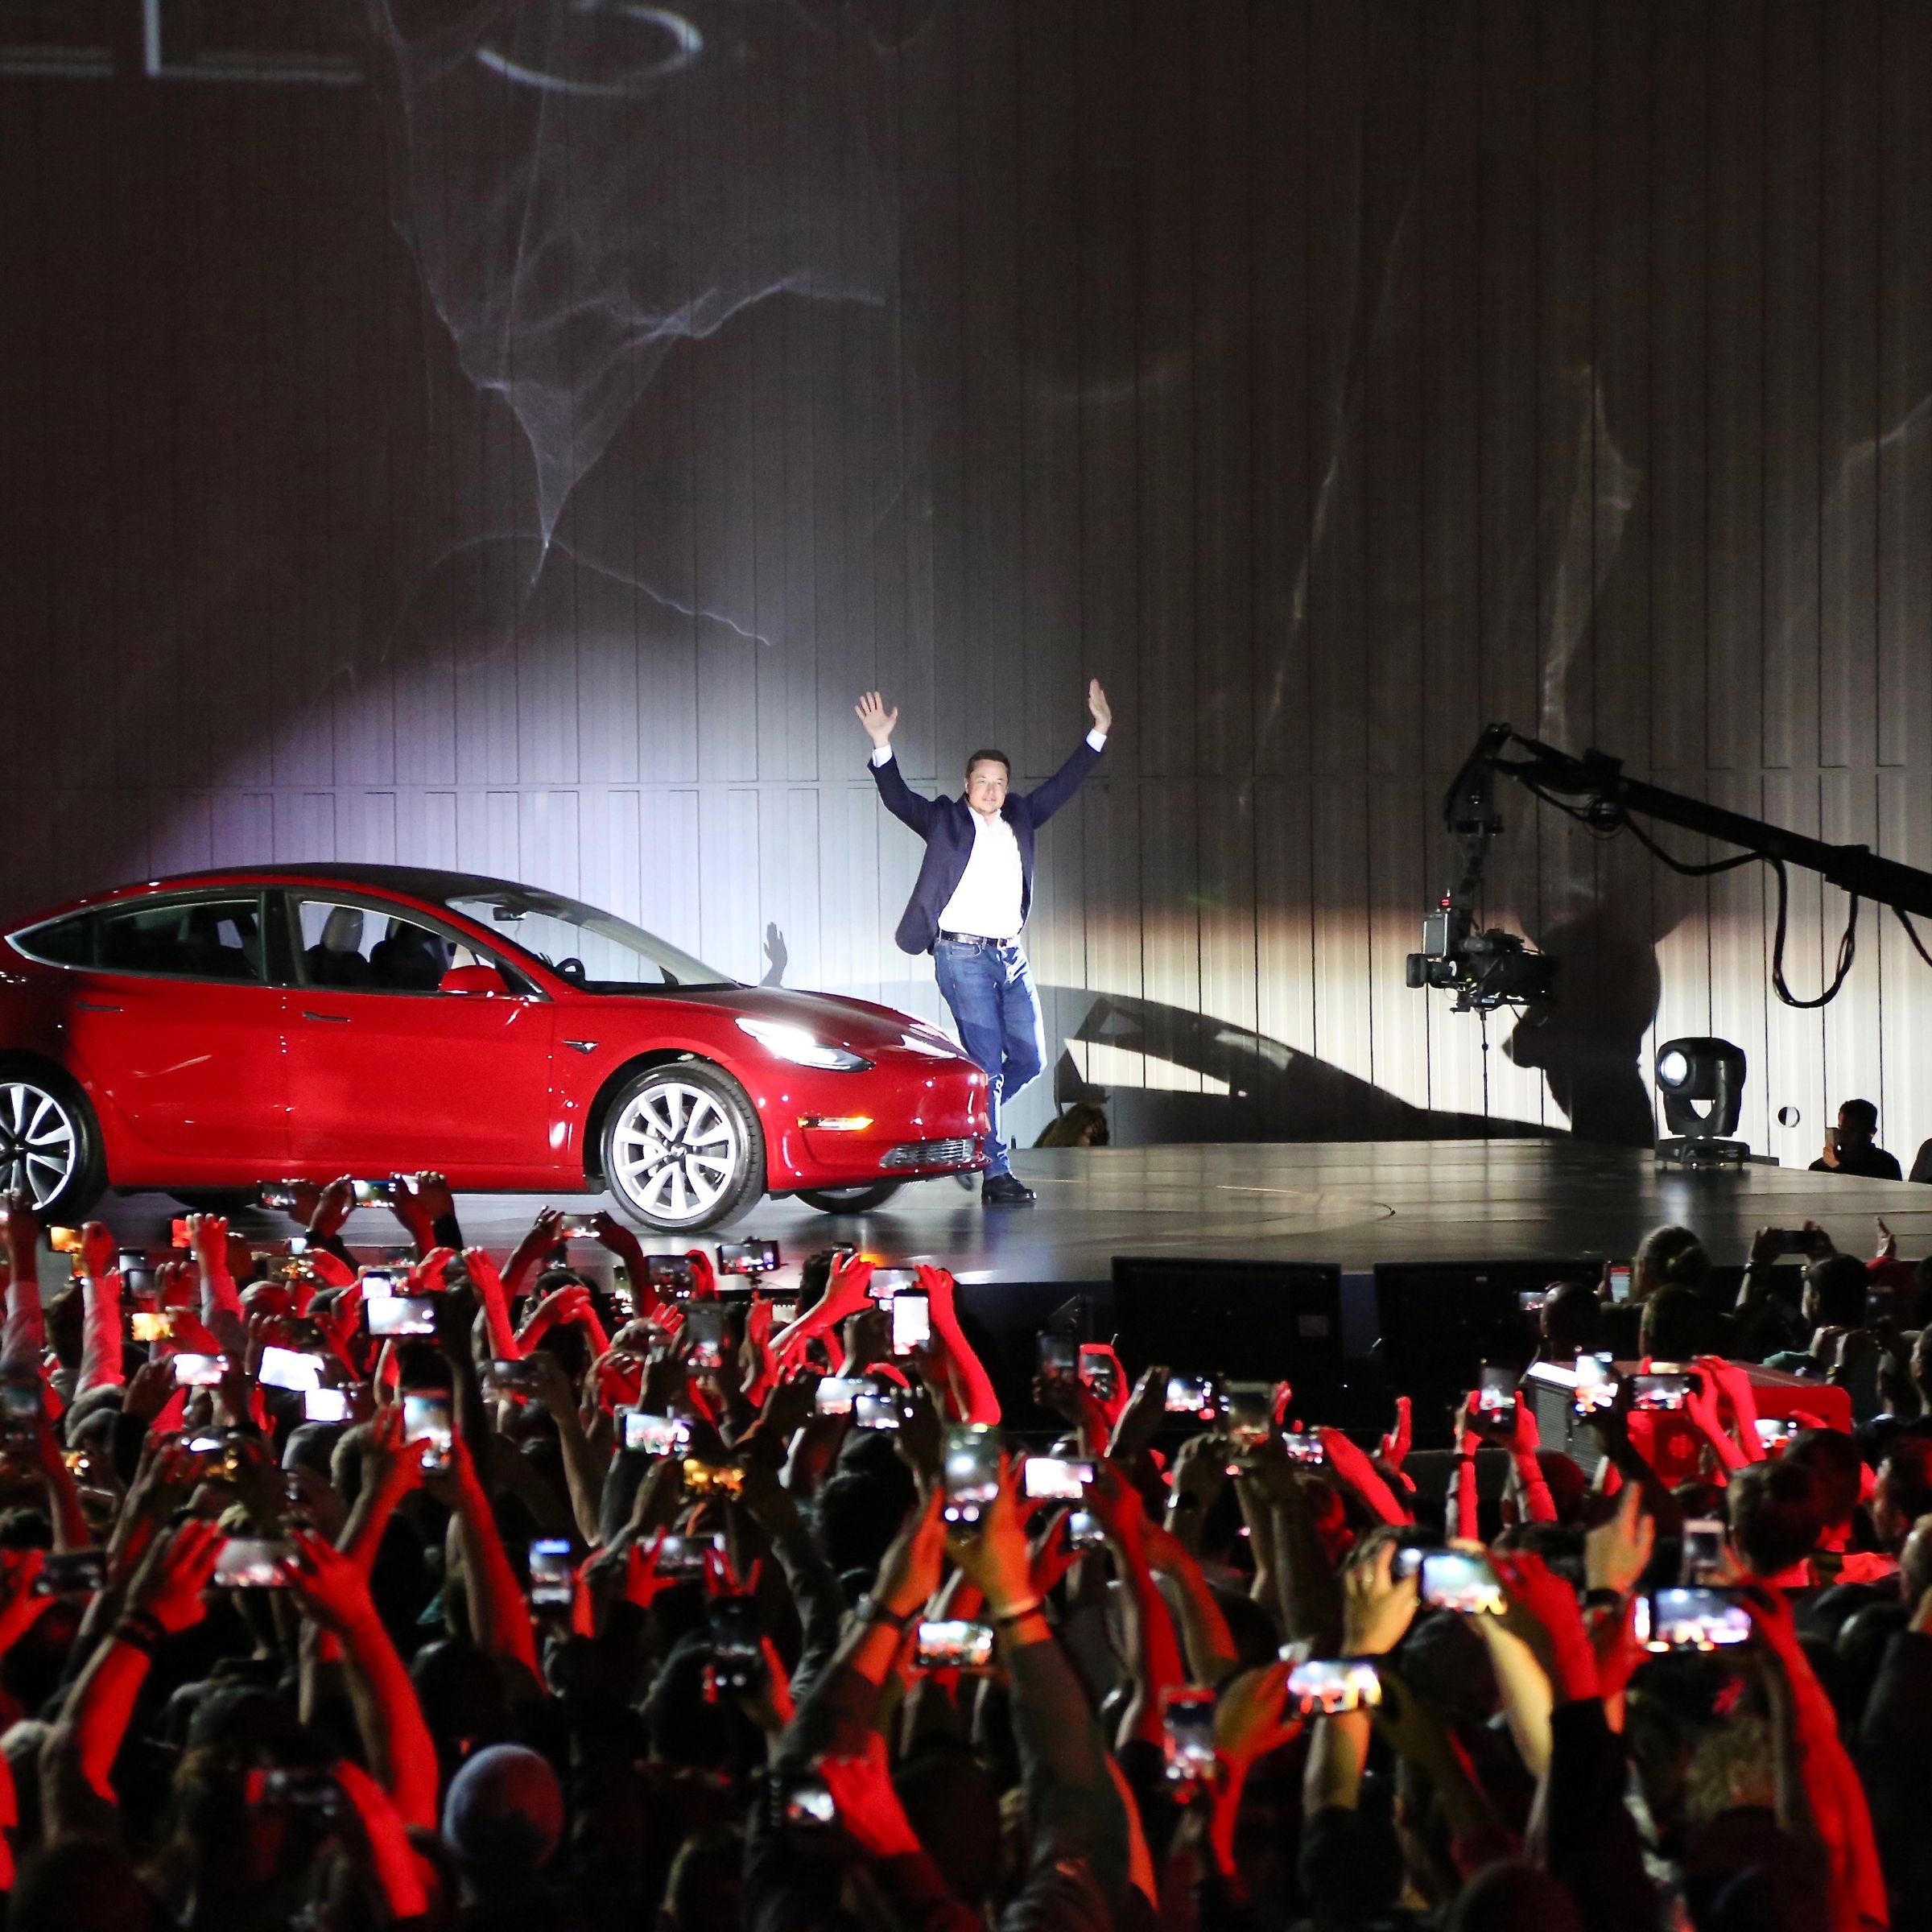 Elon Musk stands with his hands raised next to a red car on a stage in front of a crowd.